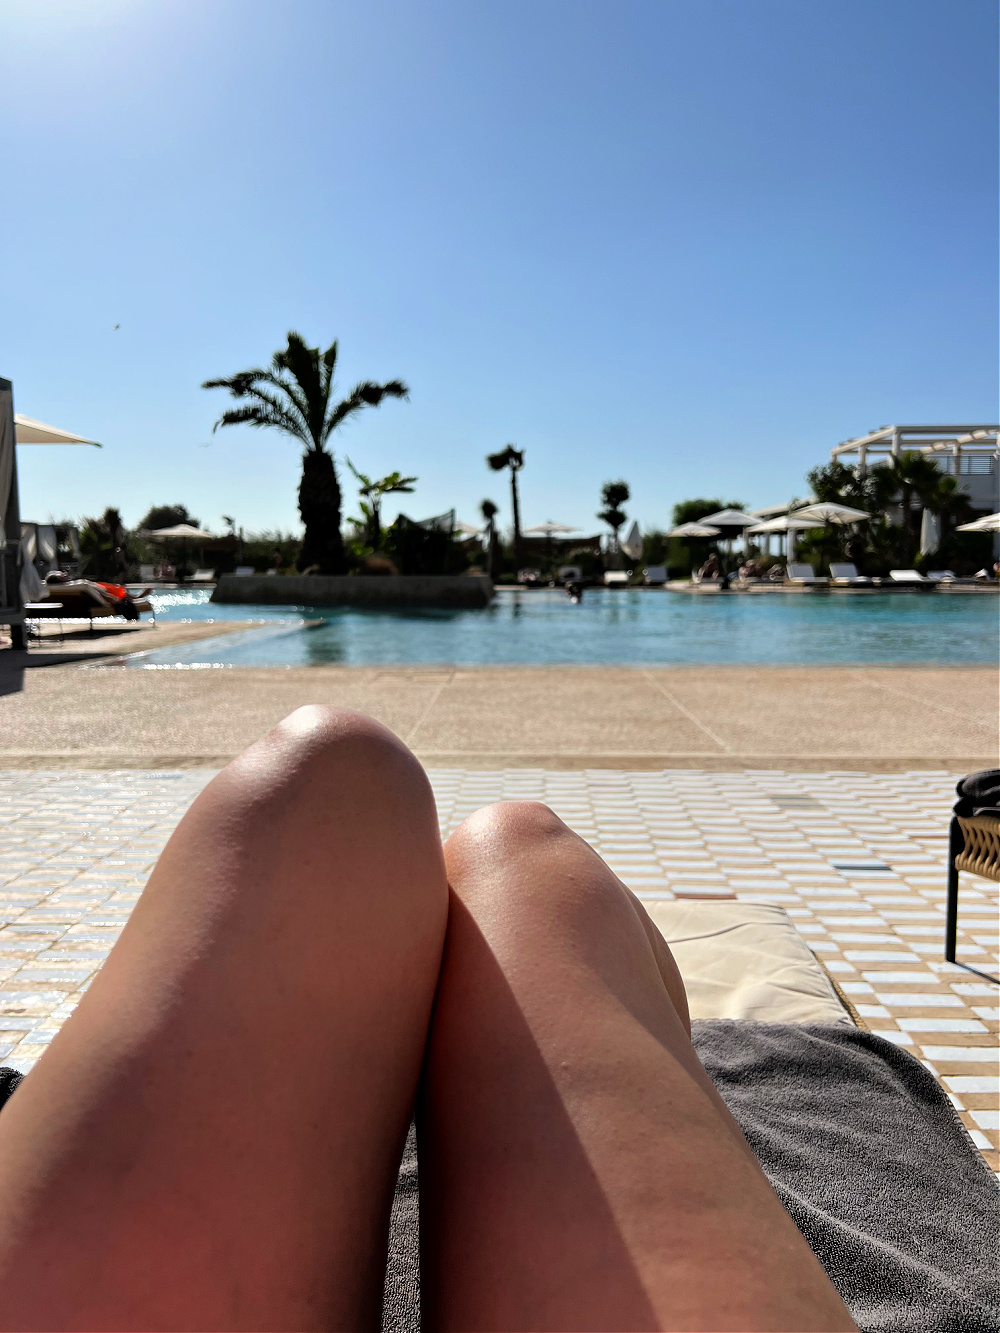 Sunbathing at the pool in Morocco